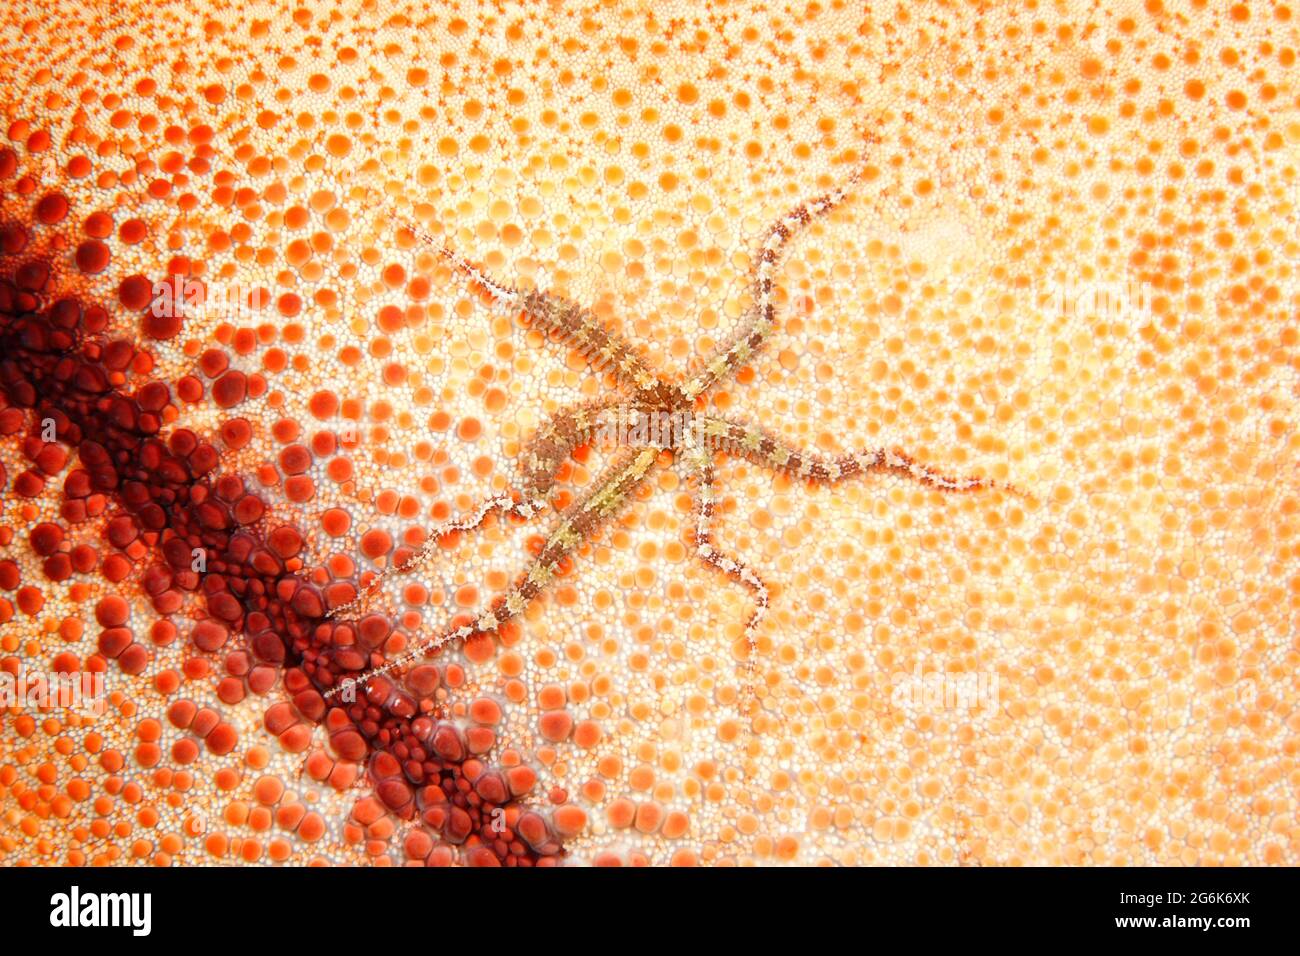 Brittle Star, Ophiactis sp. Found on the underside of a sea star. Tulamben, Bali, Indonesia. Bali Sea, Indian Ocean Stock Photo